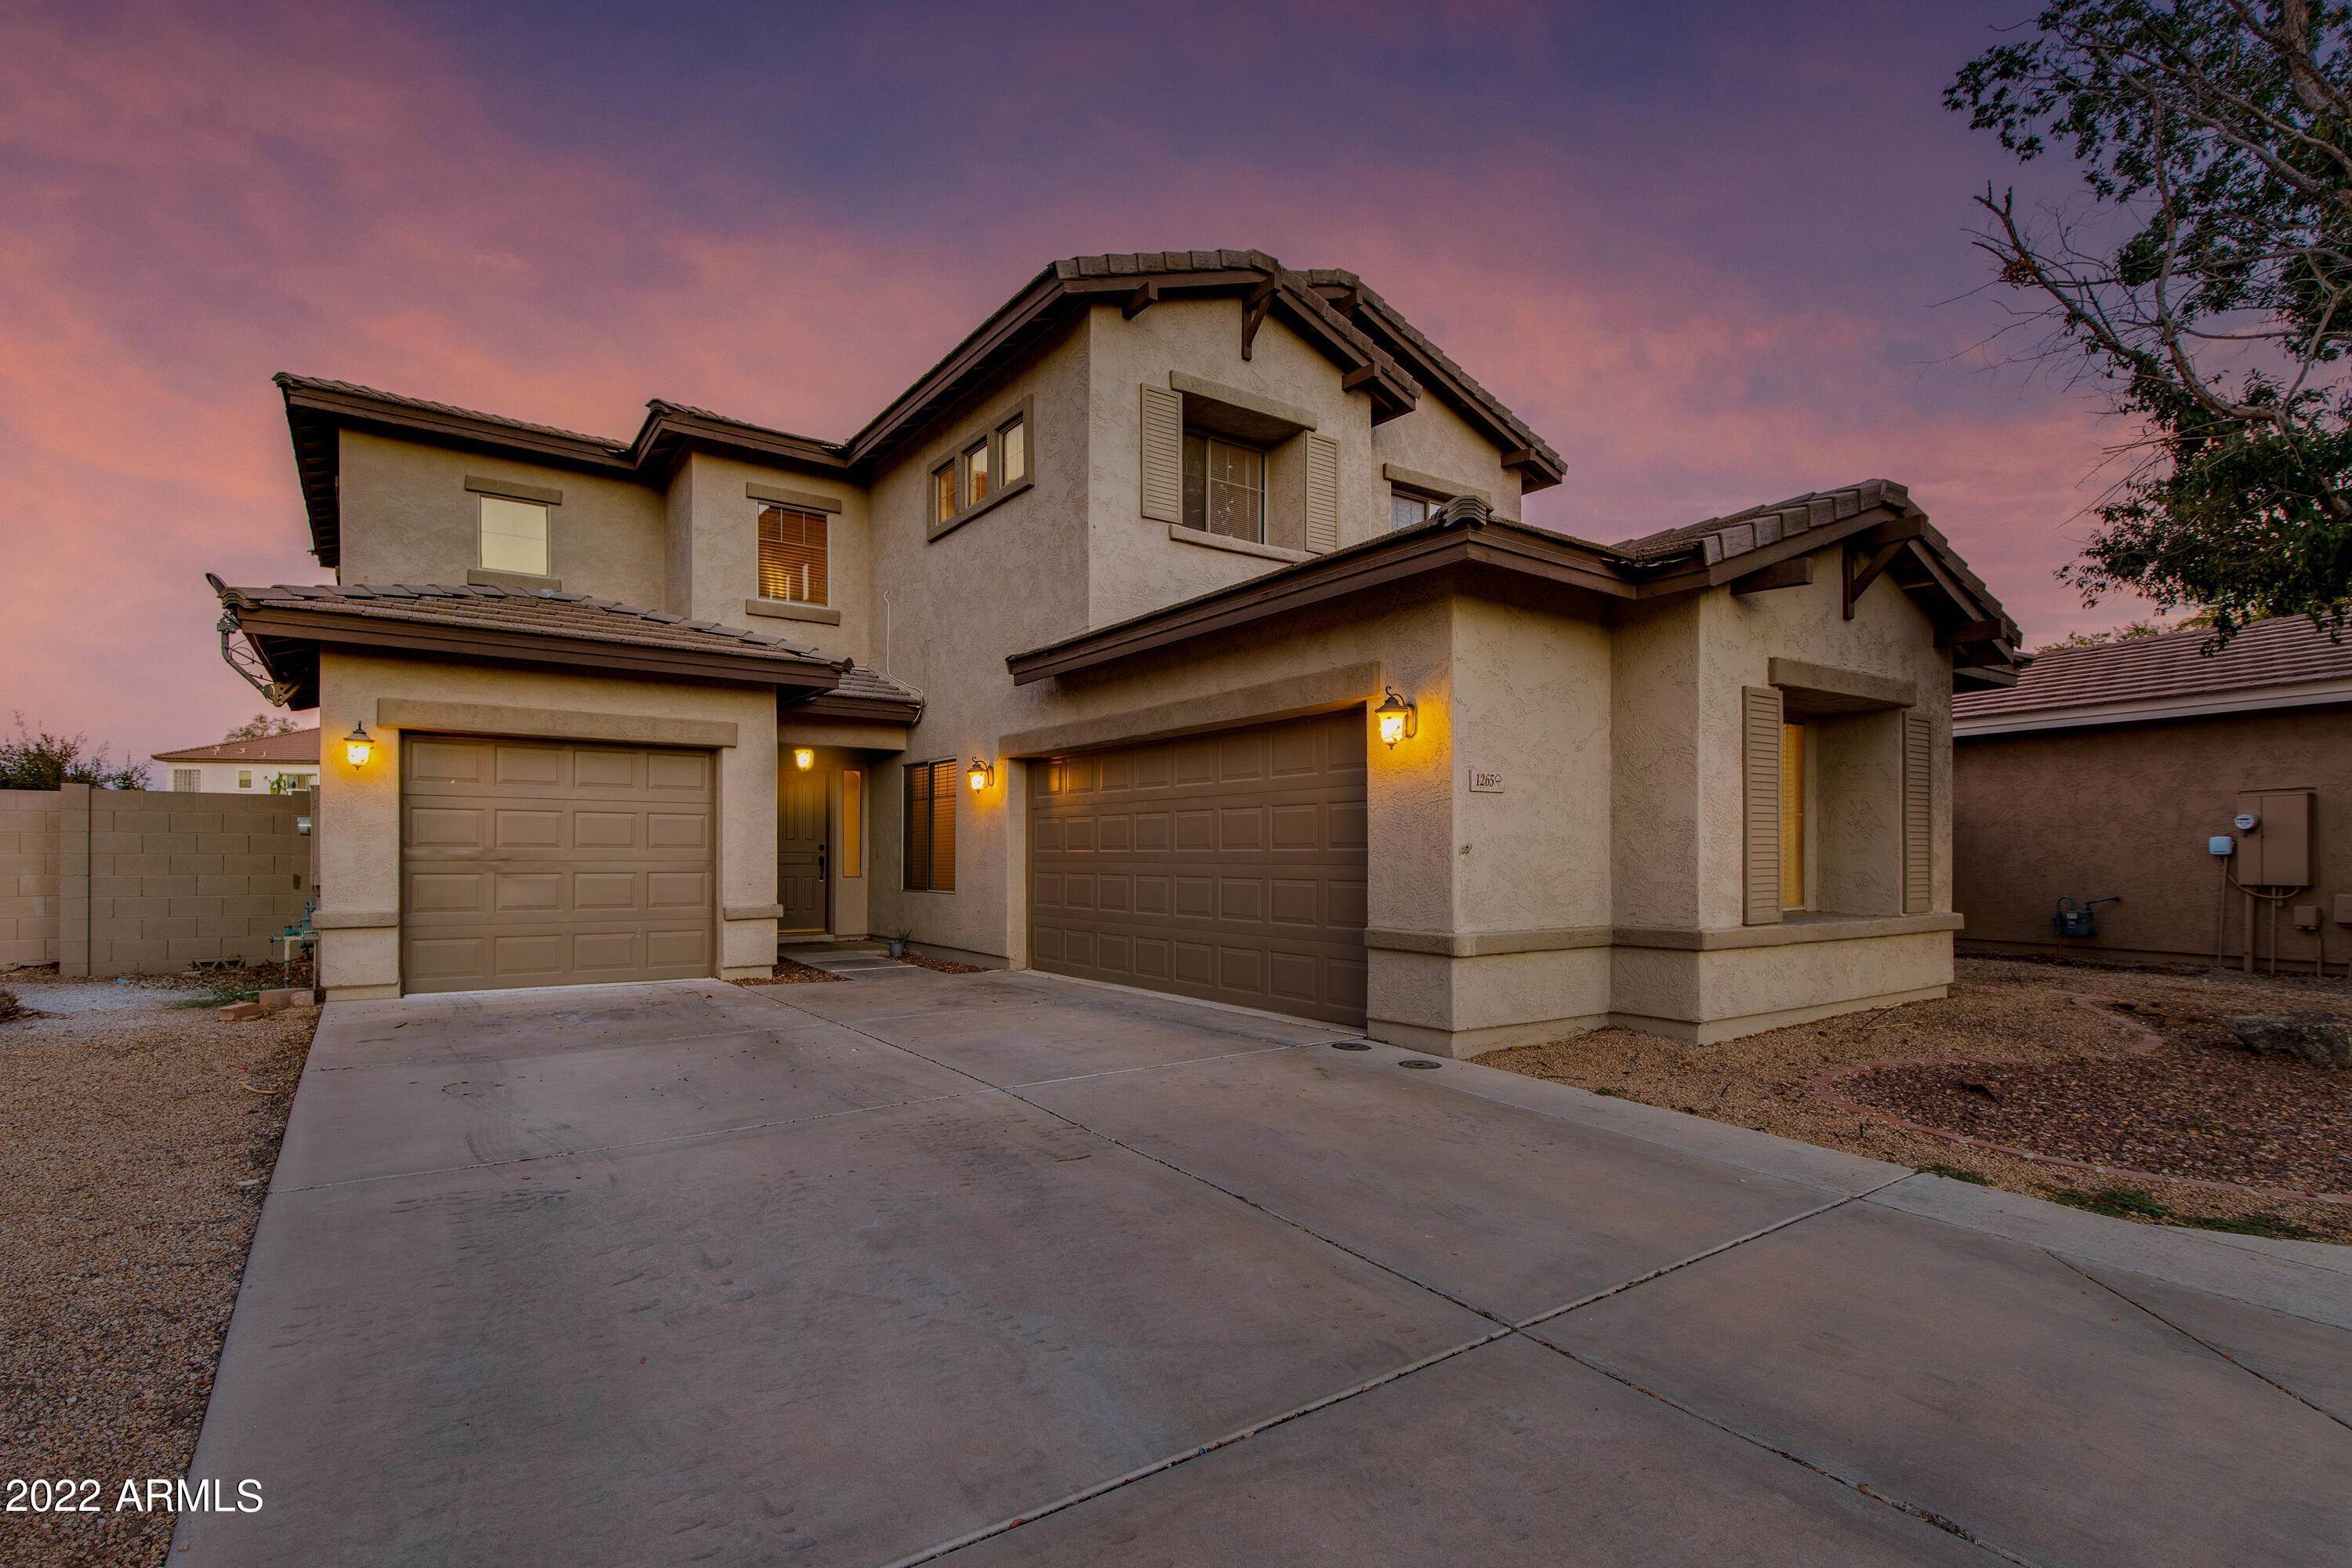 46. Single Family for Sale at Goodyear, AZ 85338